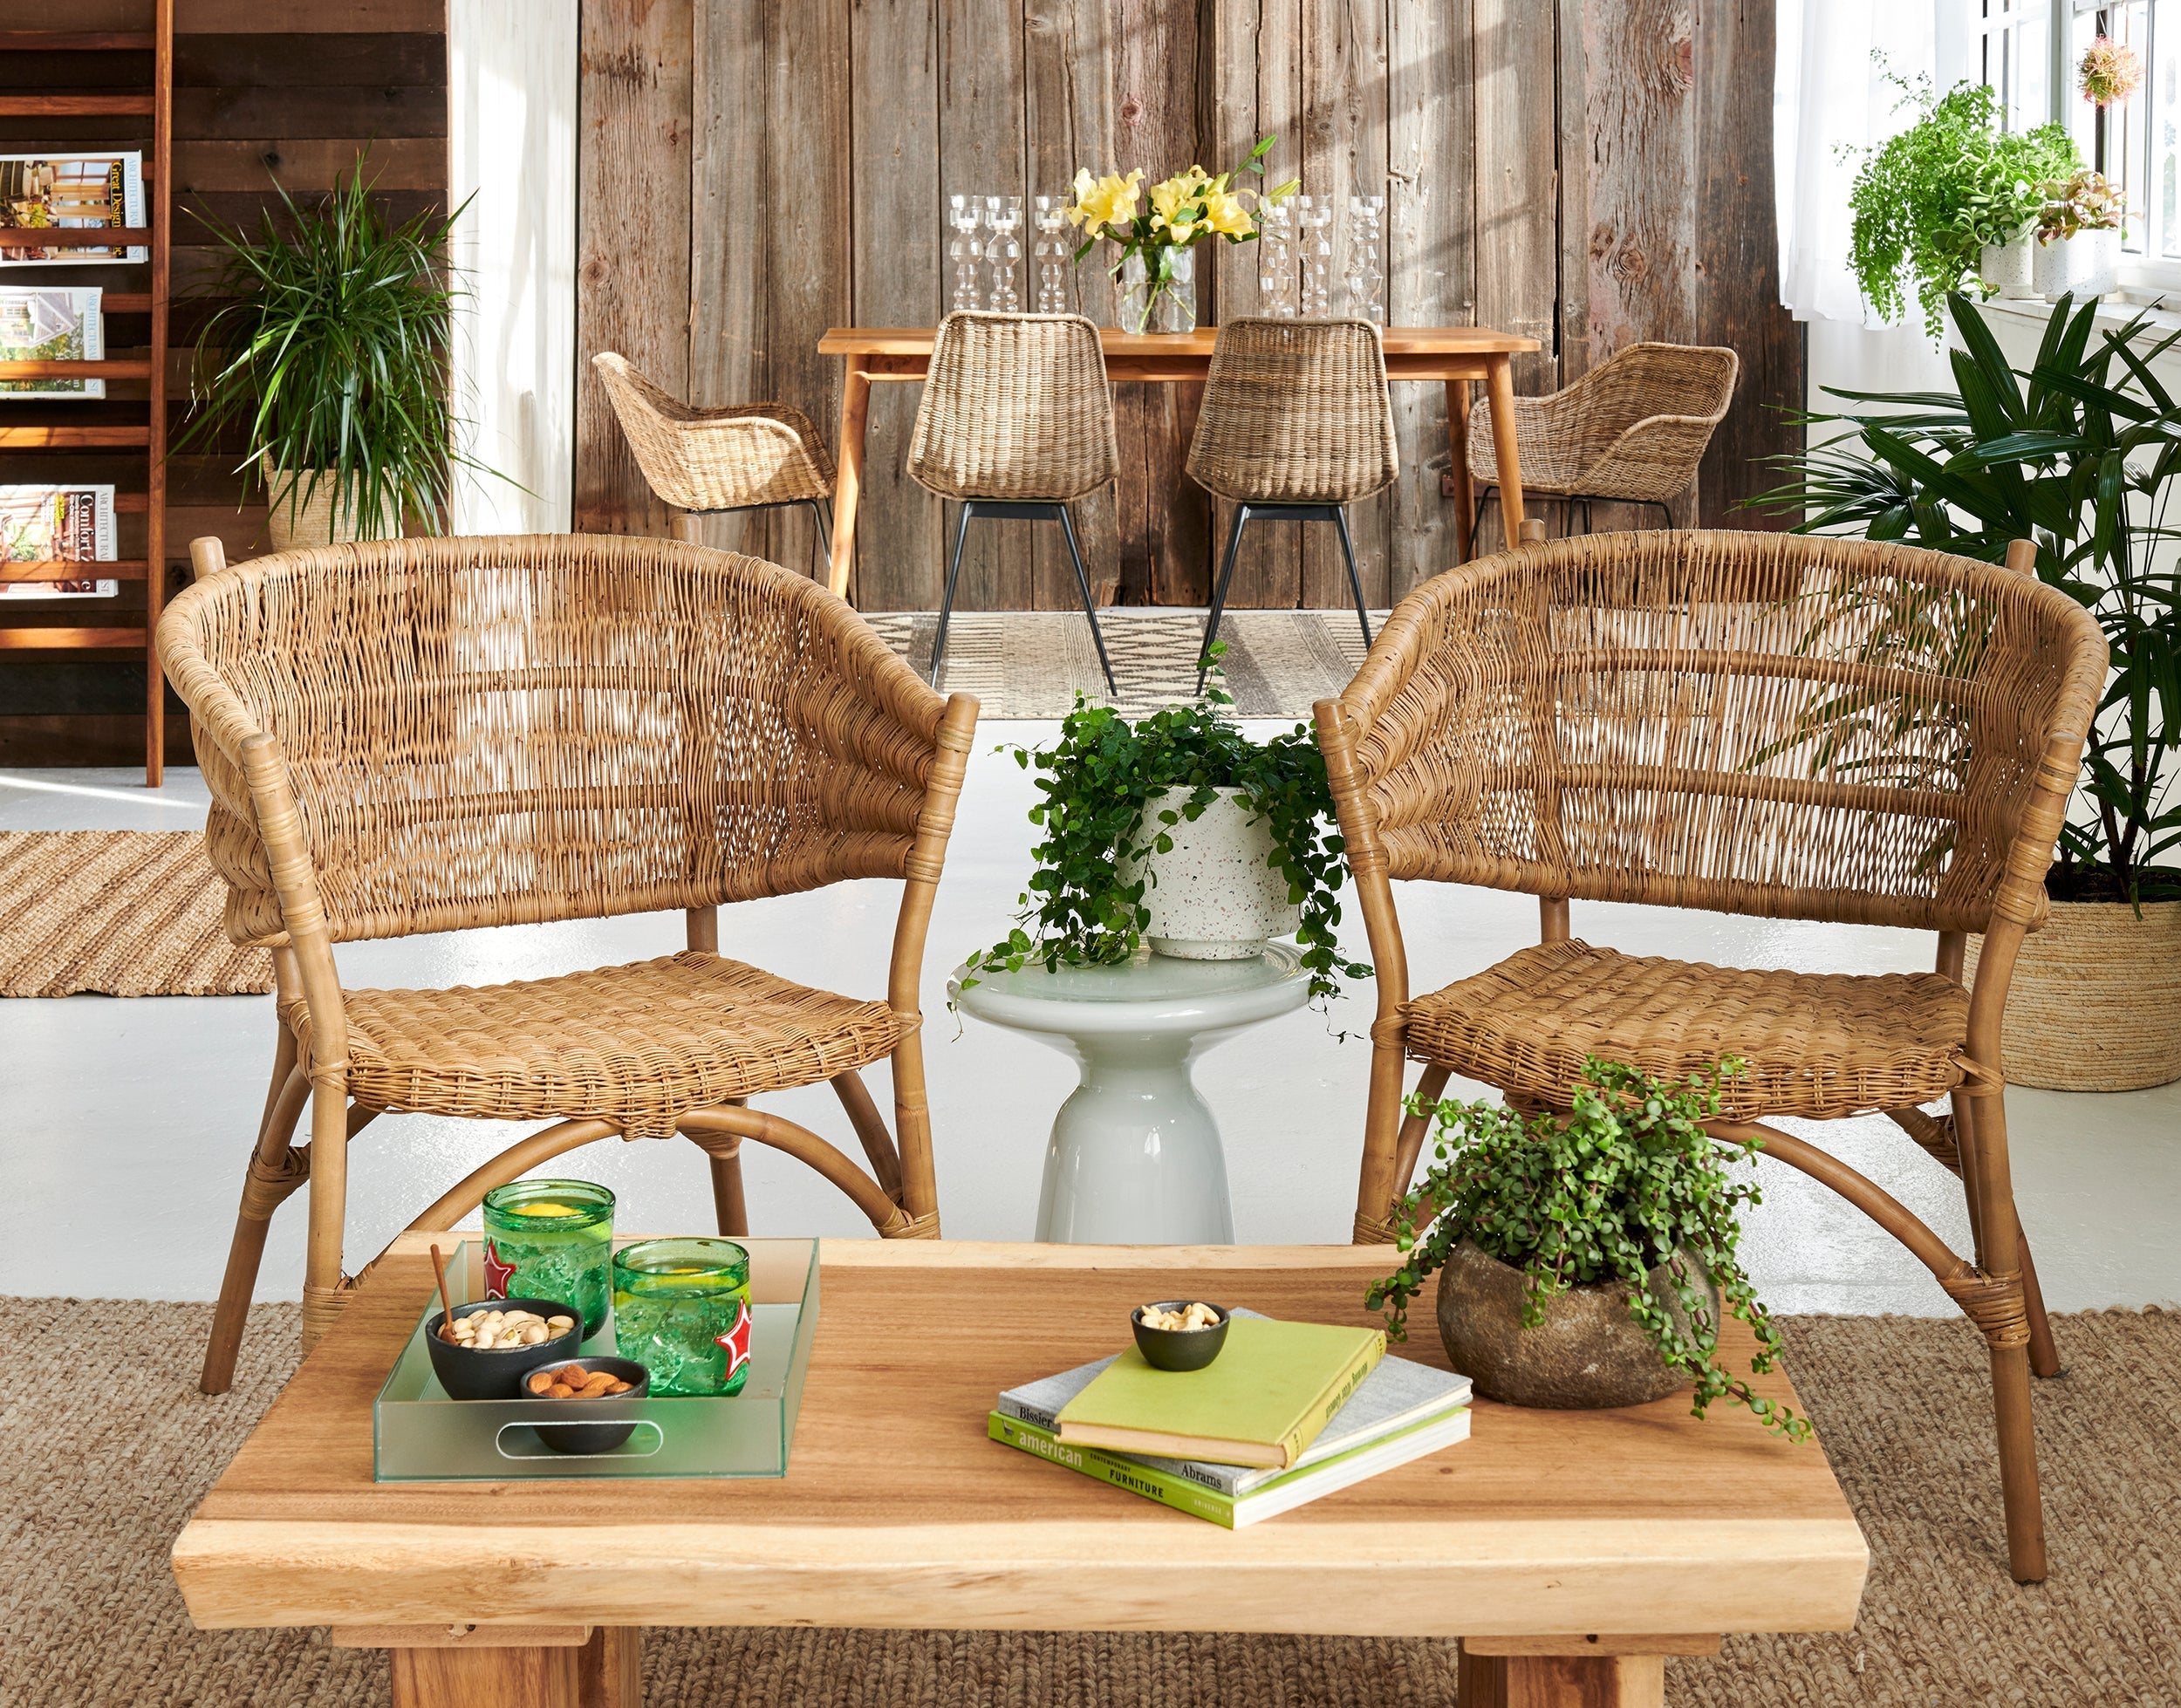 Avello Rattan Arm Chair Natural Color | Image 3 | From the Avello Collection | Elegantly constructed with natural rattan for long lasting use | Available in natural color | texxture home